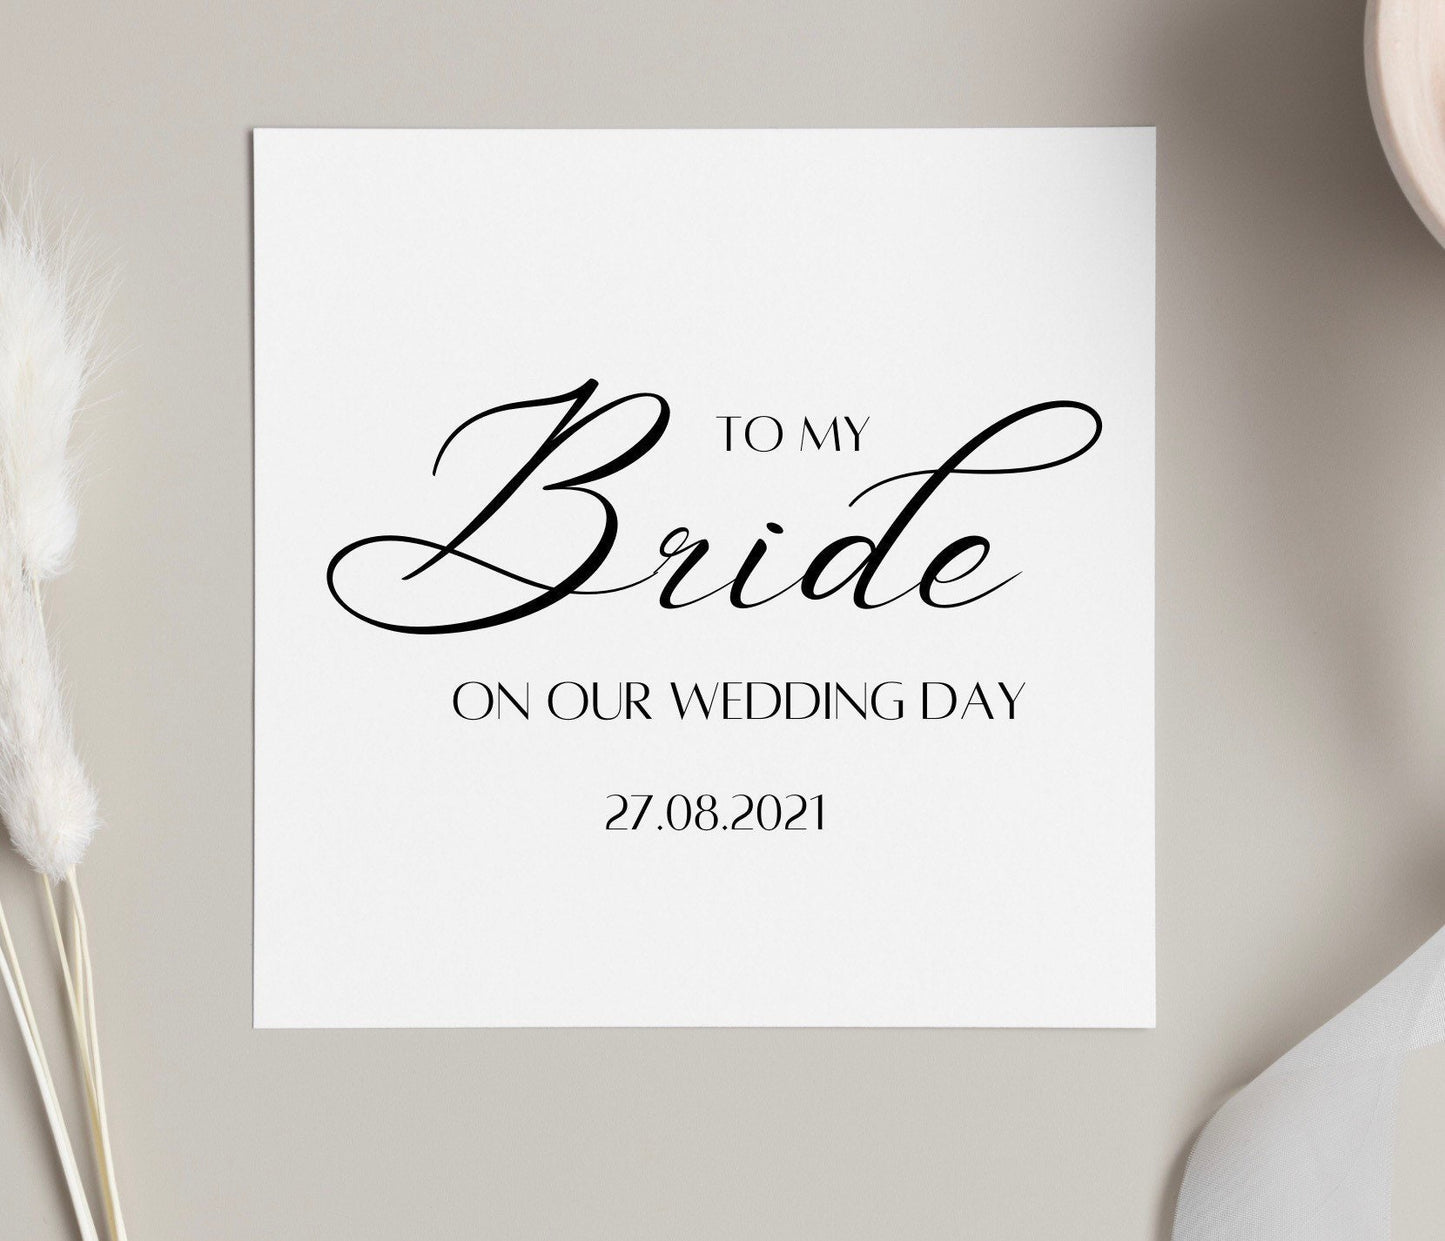 To my bride on our wedding day personalised card for wife to be, cards from groom to bride, marry you cards